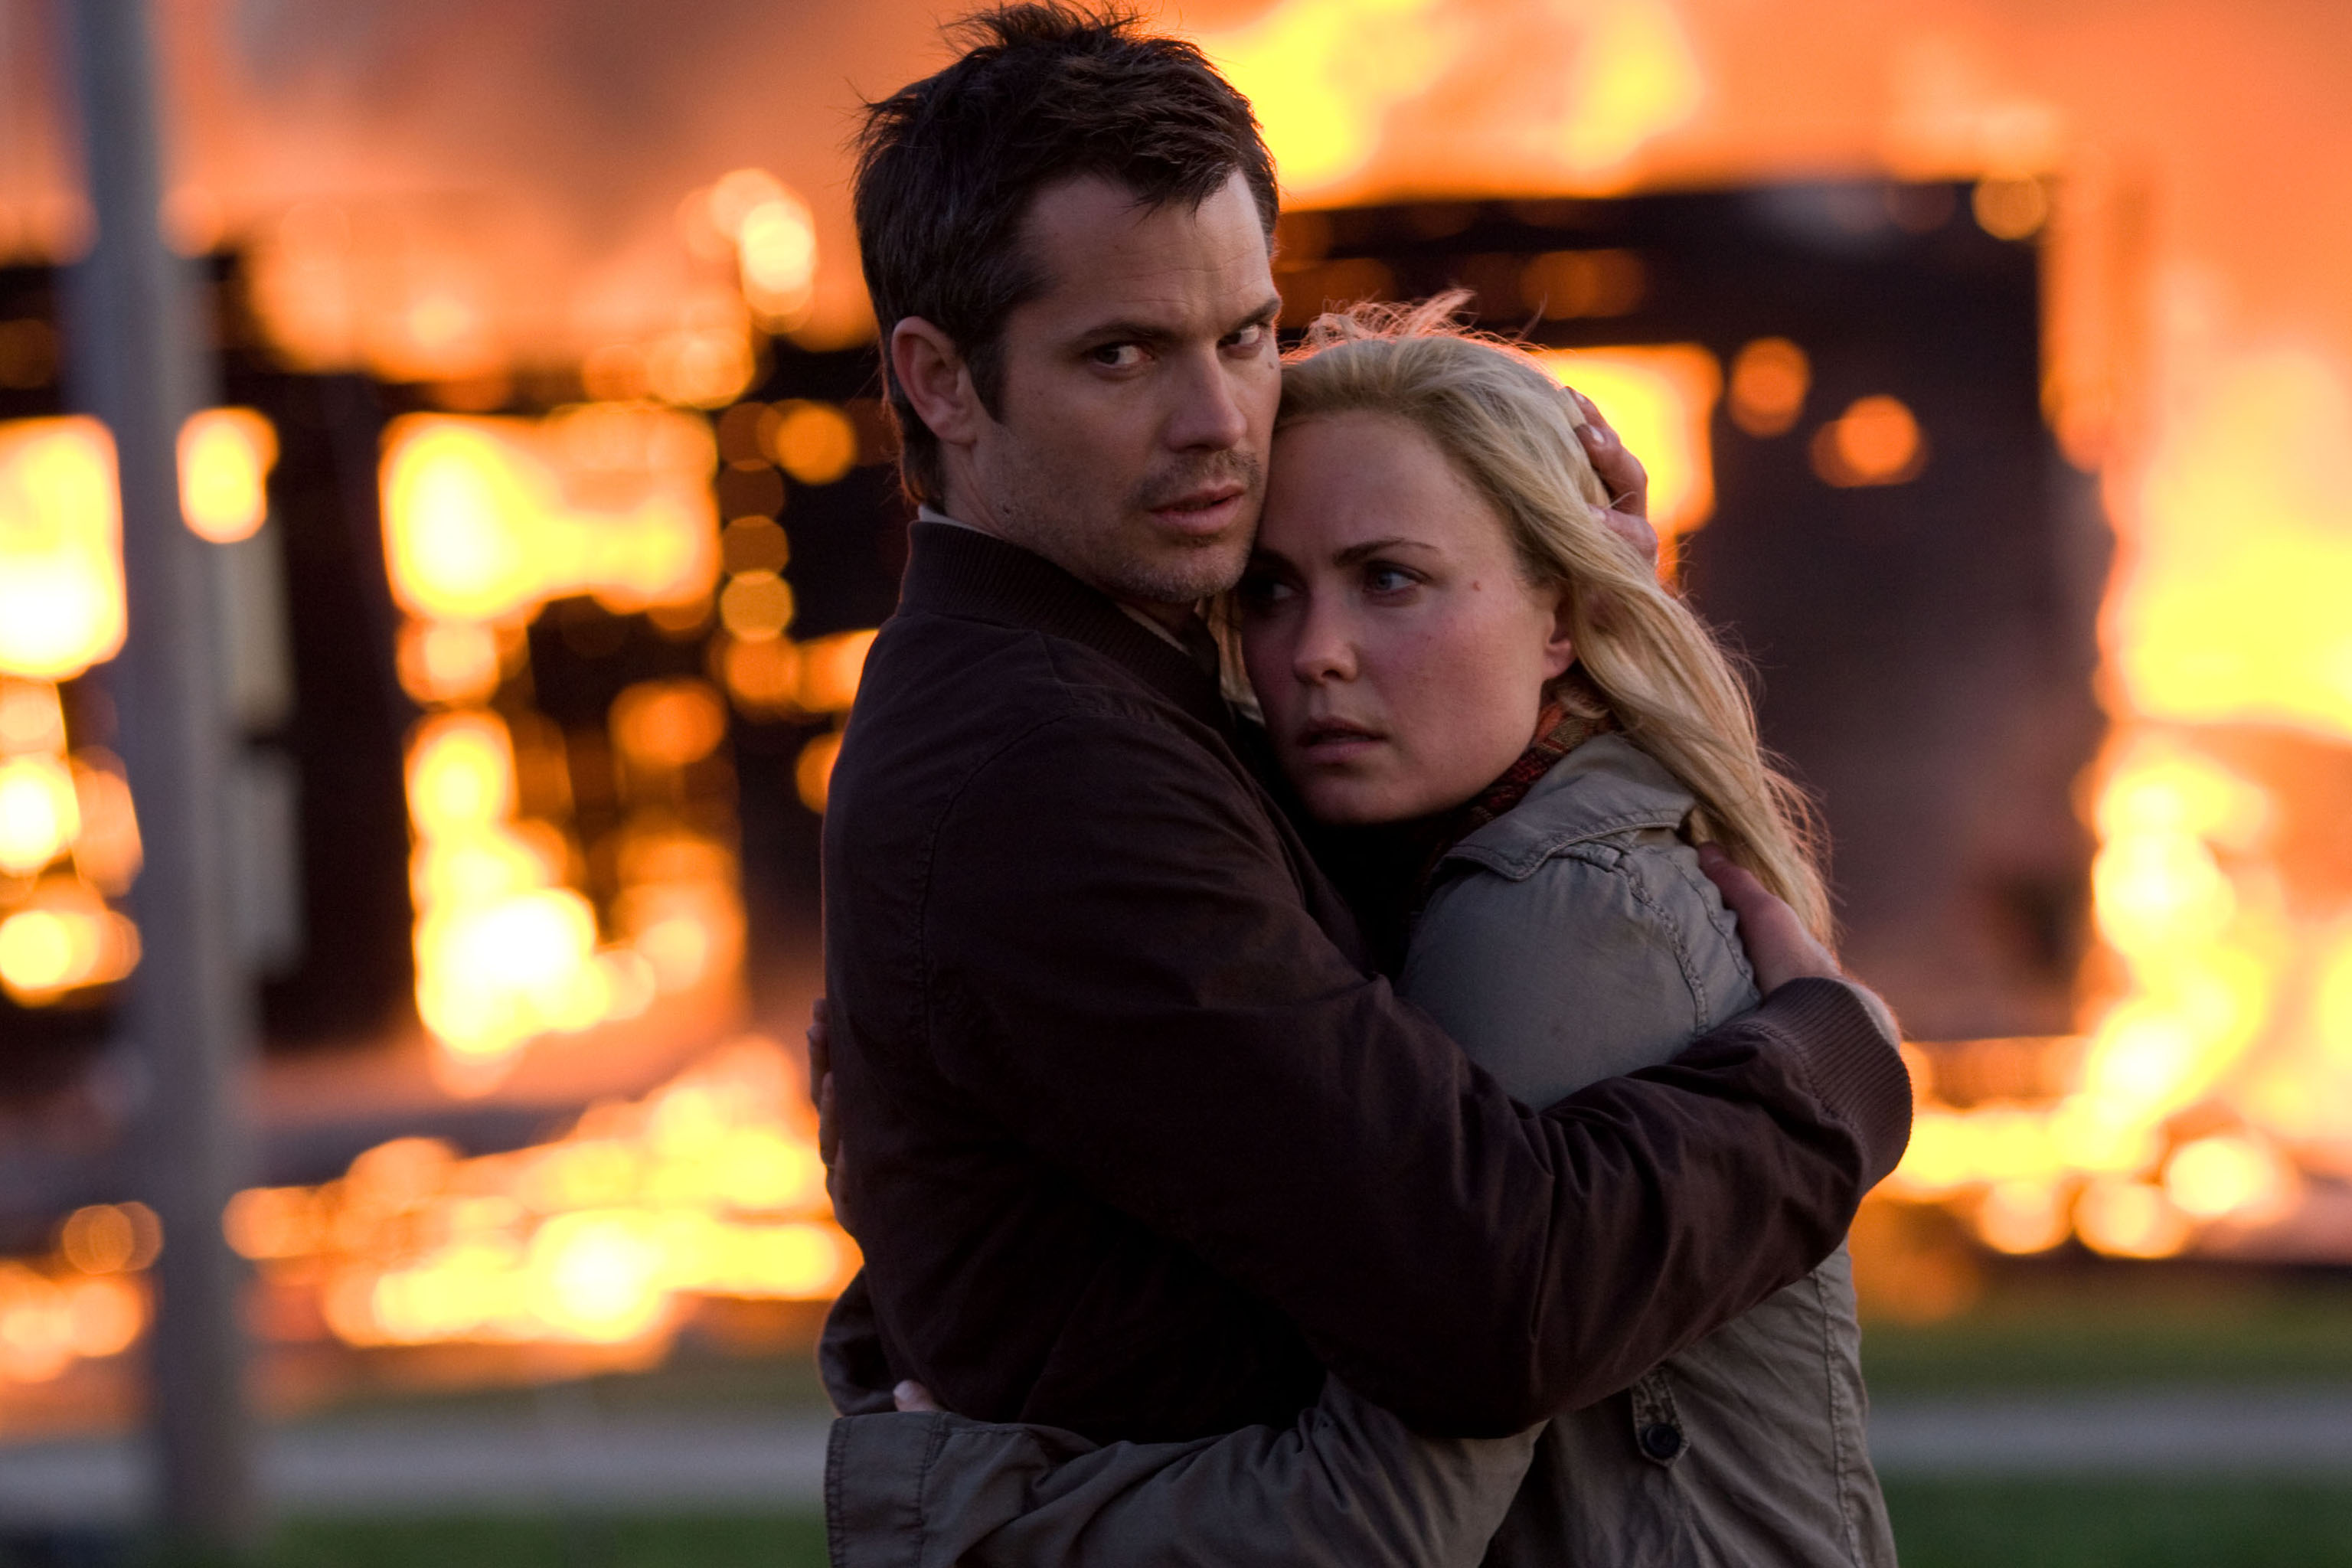 A scene depicting Radha Mitchell and Timothy Olyphant in the movie The Crazies.